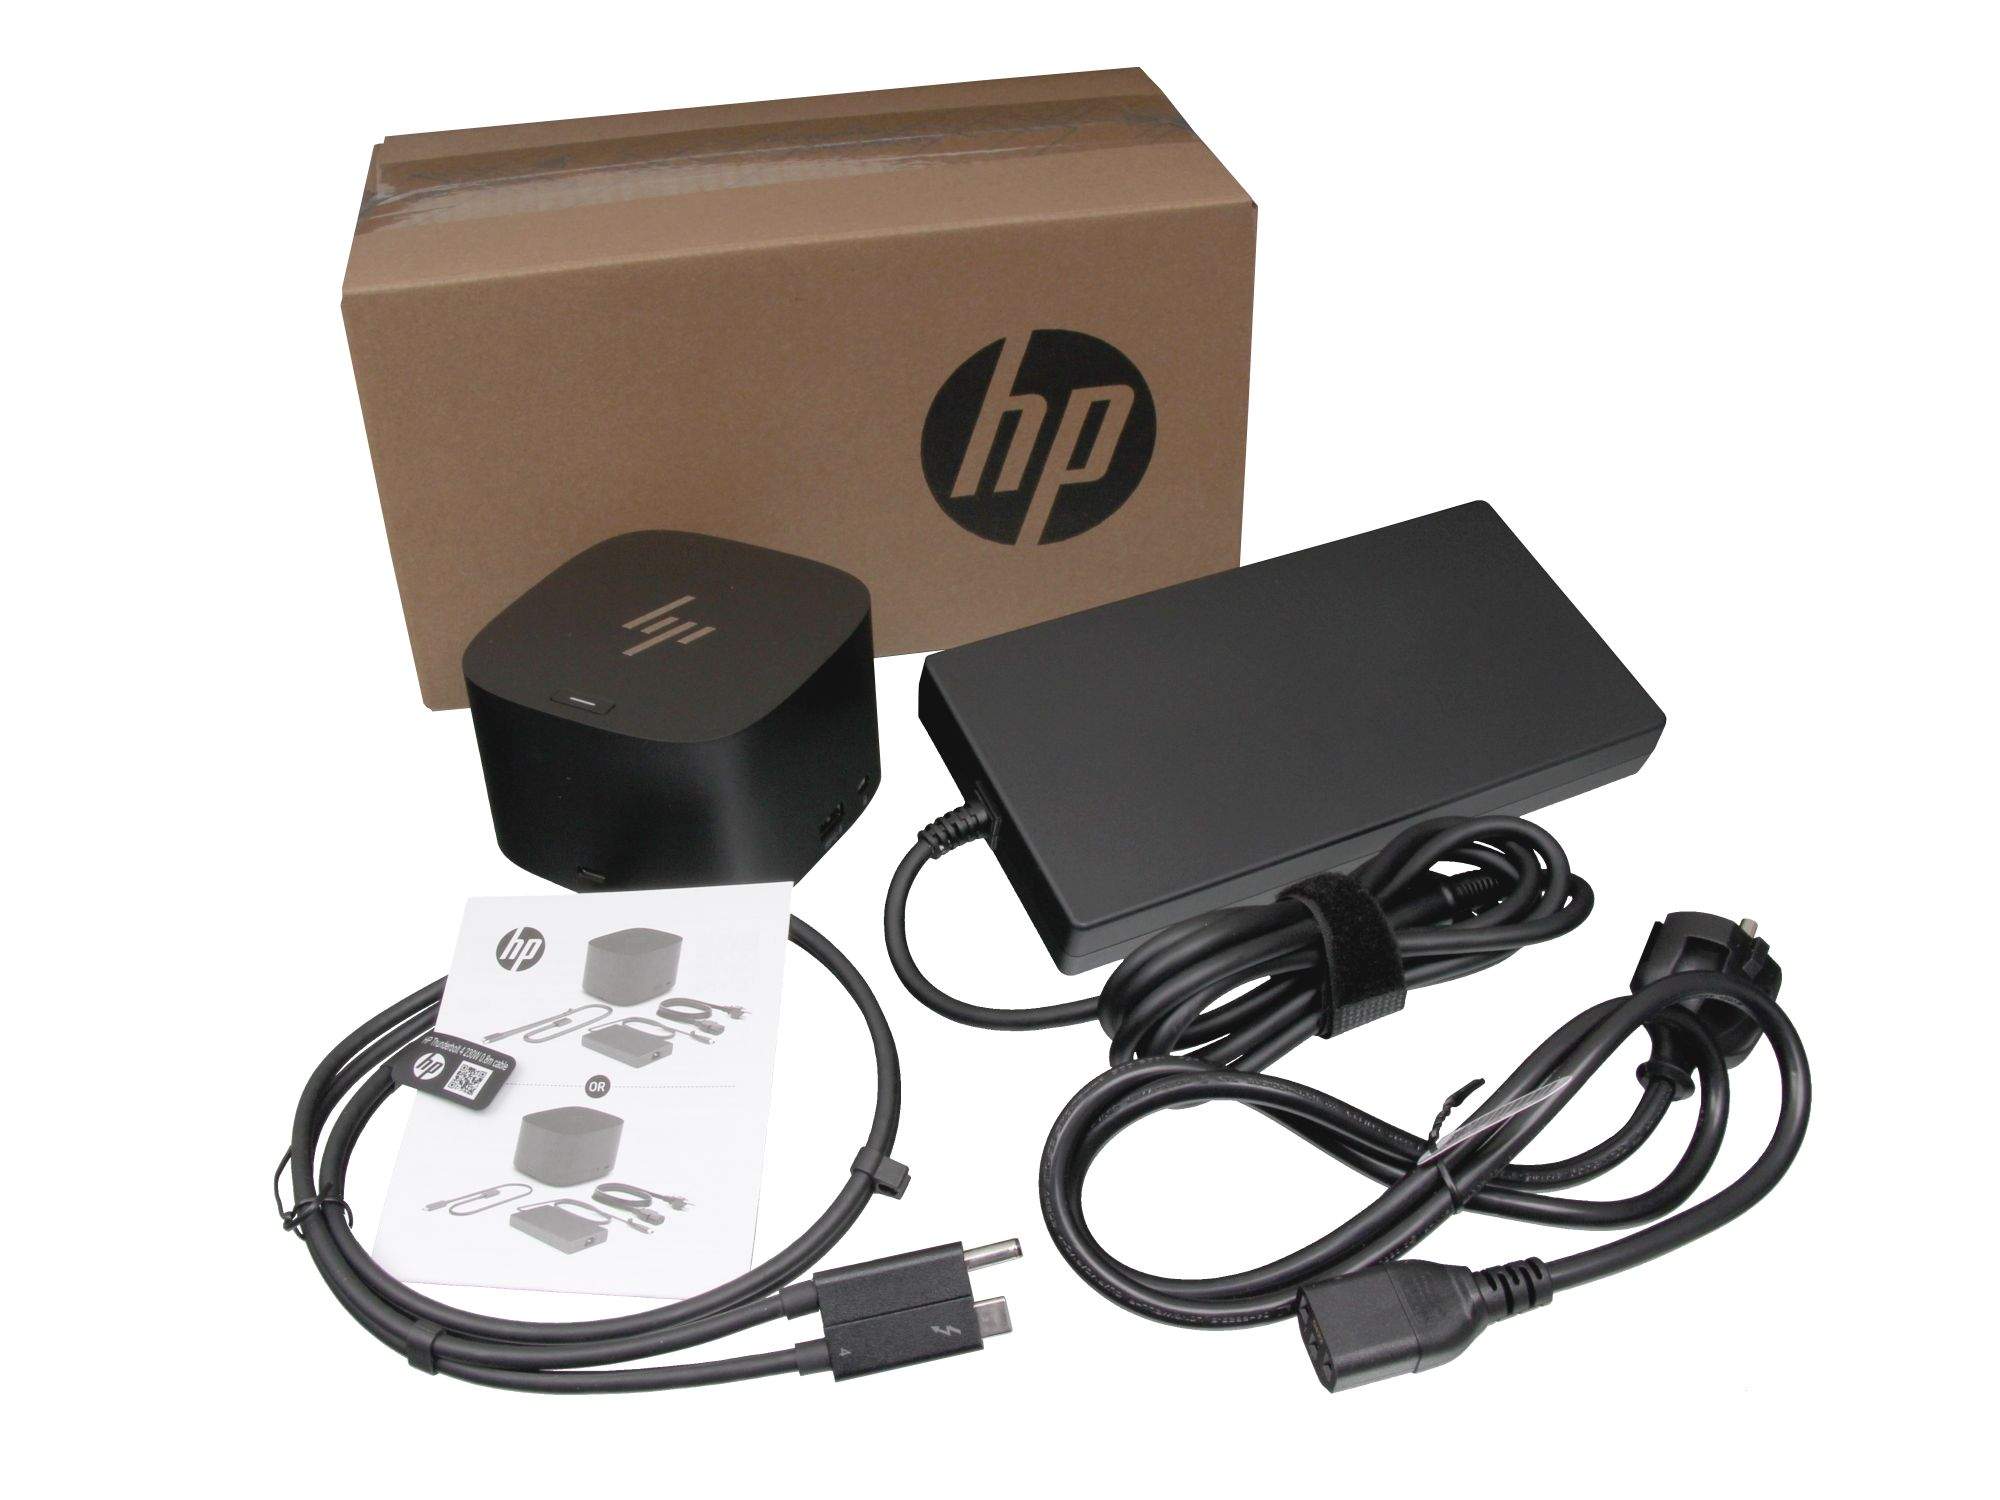 HP Thunderbolt Dock G4 280W with Combo Cable, EU